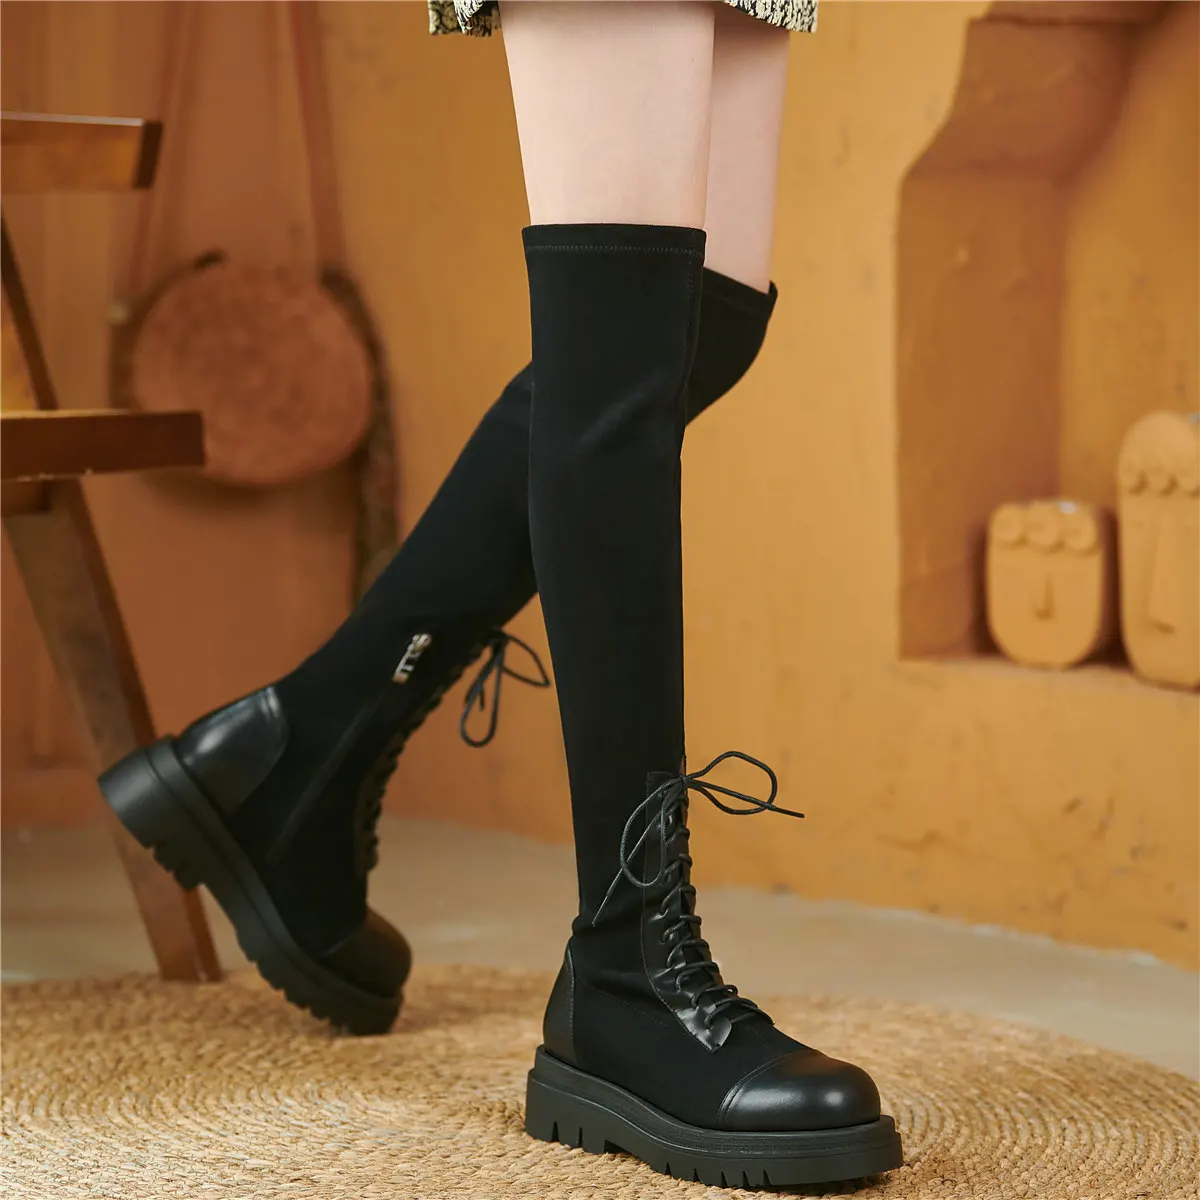 

Thigh High Fashion Sneakers Women Leather Chunky Heels Over The Knee High Boots Female Stretchy Velvet Platform Oxfords Shoes